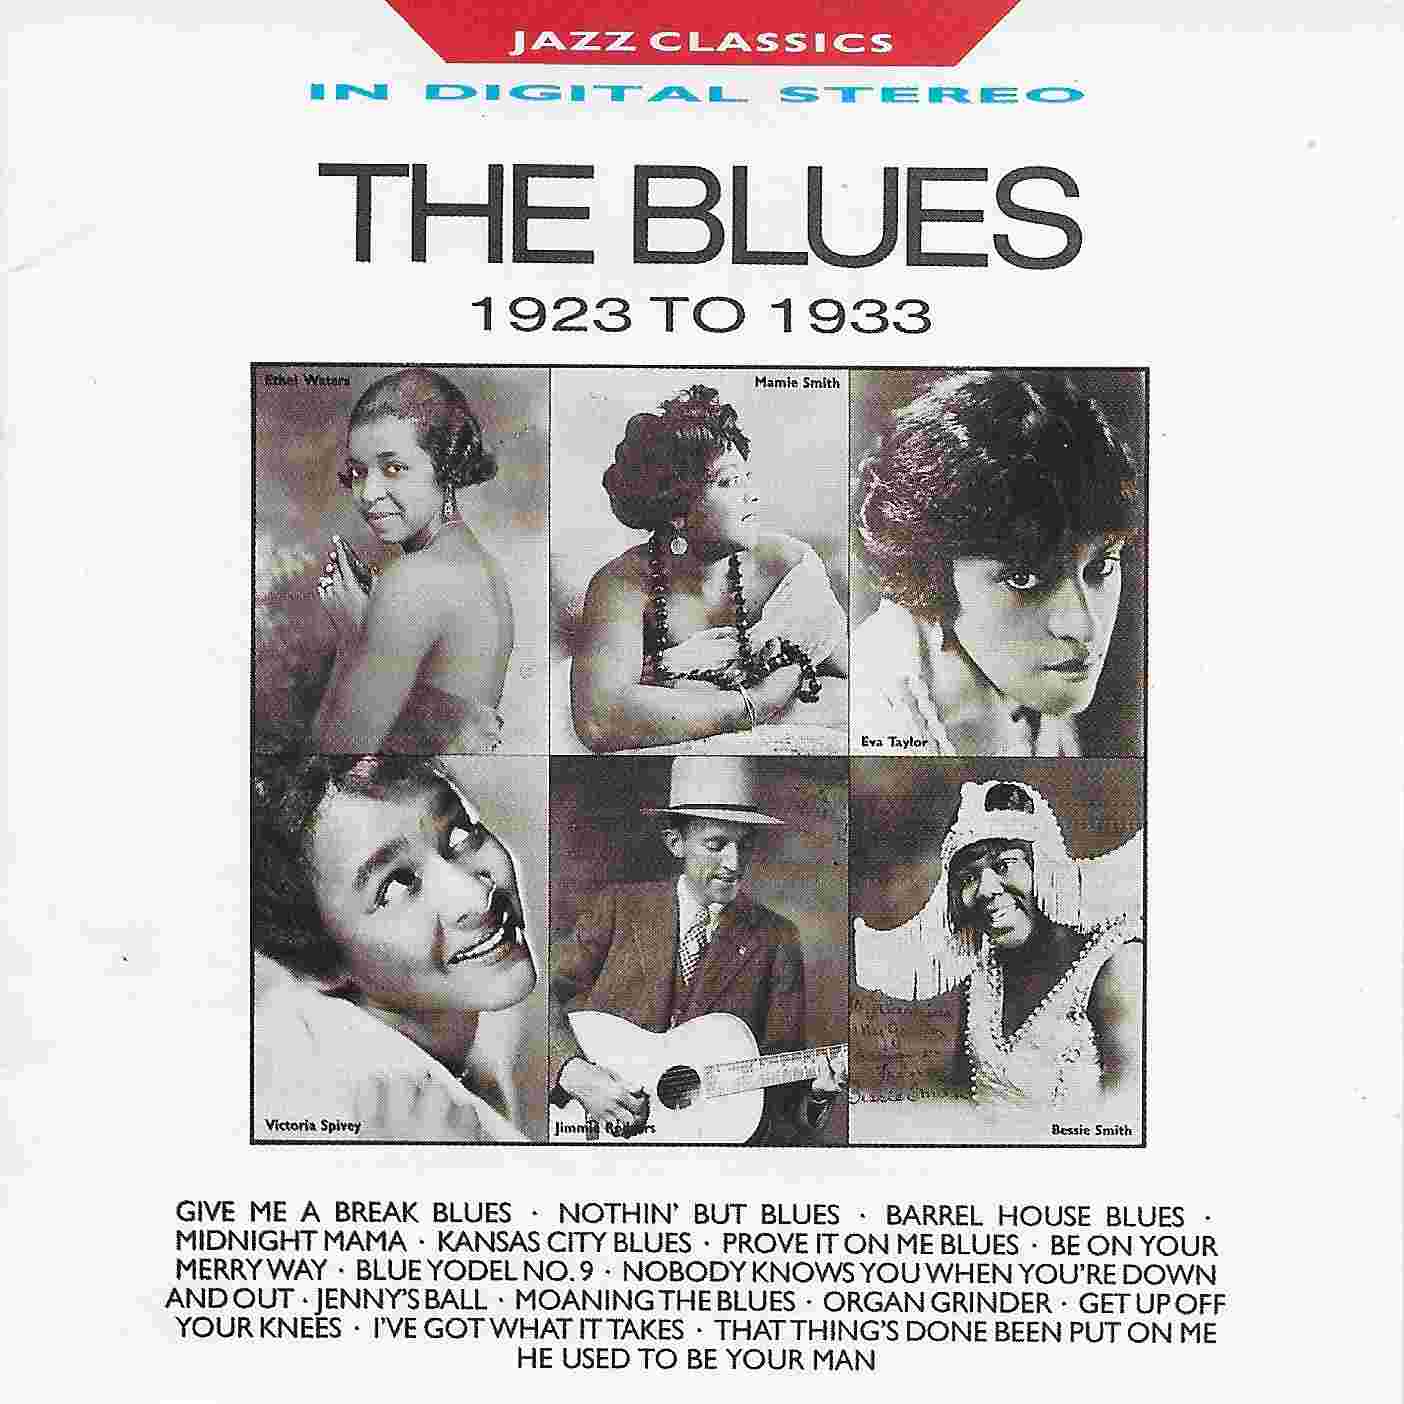 Picture of Jazz classics - The blues 1929 - 1937 by artist Various from the BBC cds - Records and Tapes library